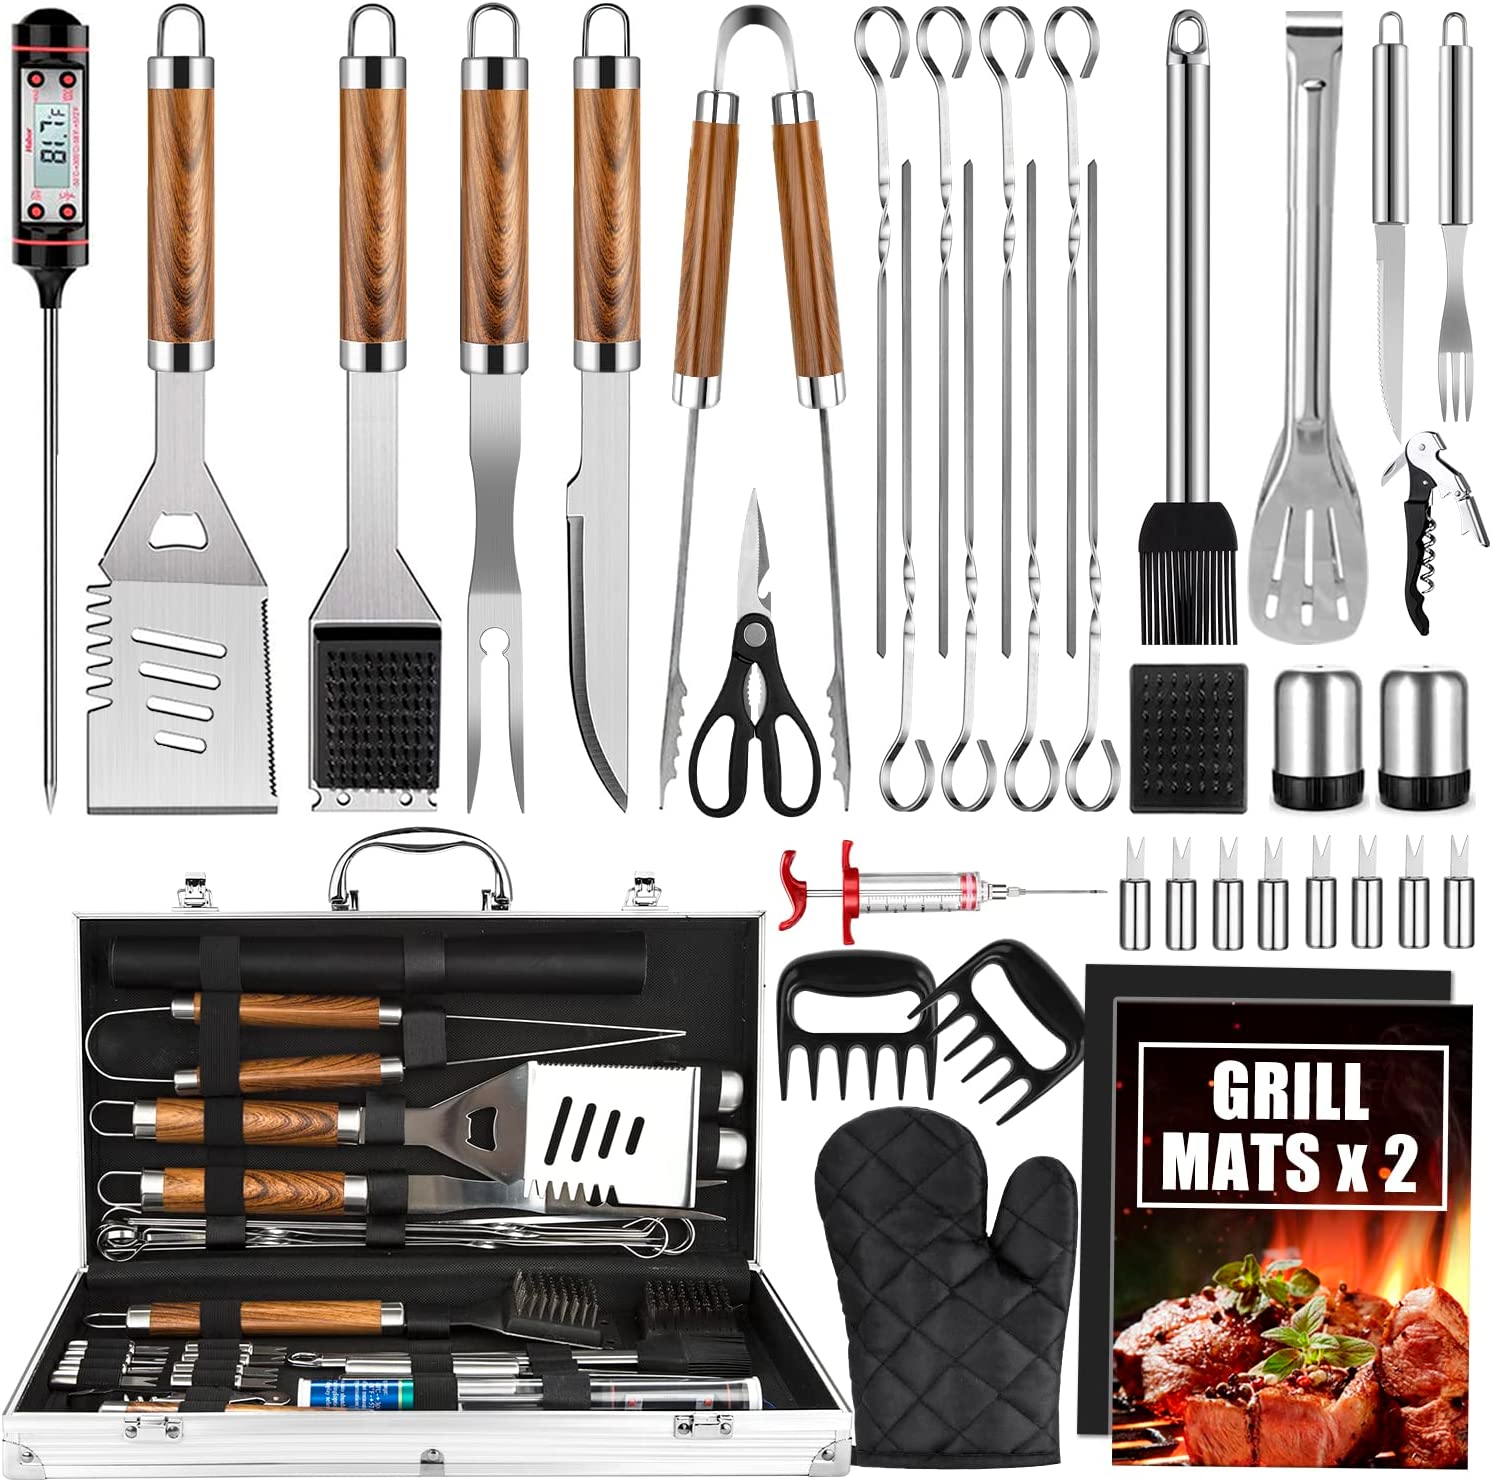 BBQ Grill Accessories Set, 38Pcs Stainless Steel Grill Tools Grilling Accessories with Aluminum Case, for Camping/Backyard Barbecue - image 1 of 7